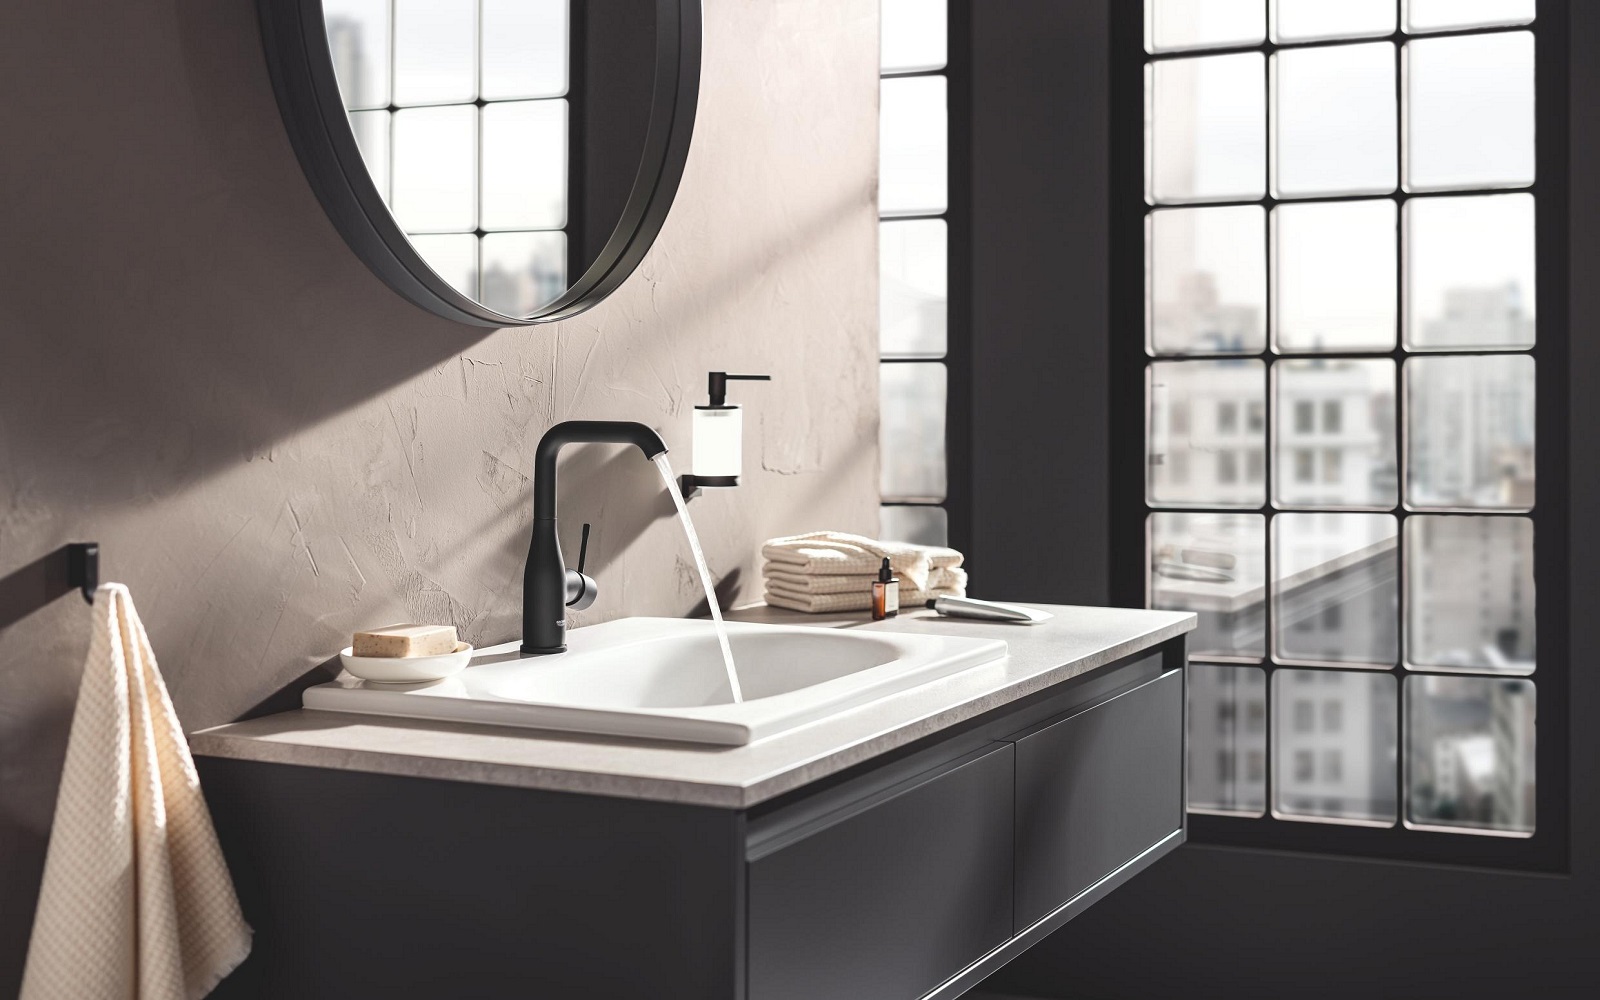 black tap from GROHE in phantom black above square basin and below round mirror